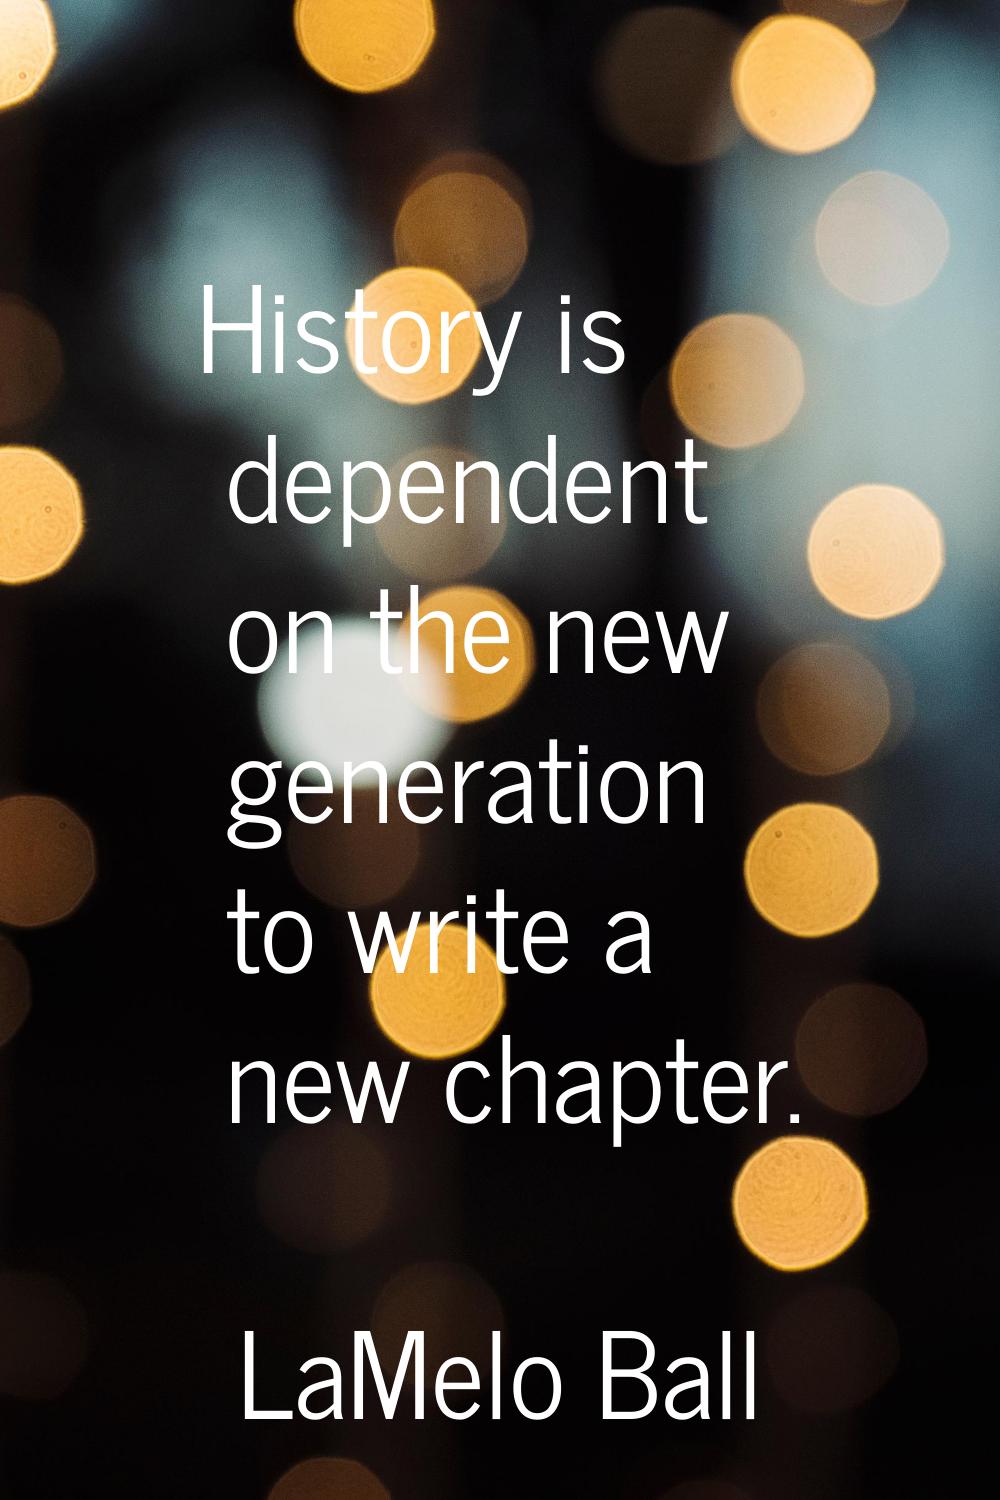 History is dependent on the new generation to write a new chapter.